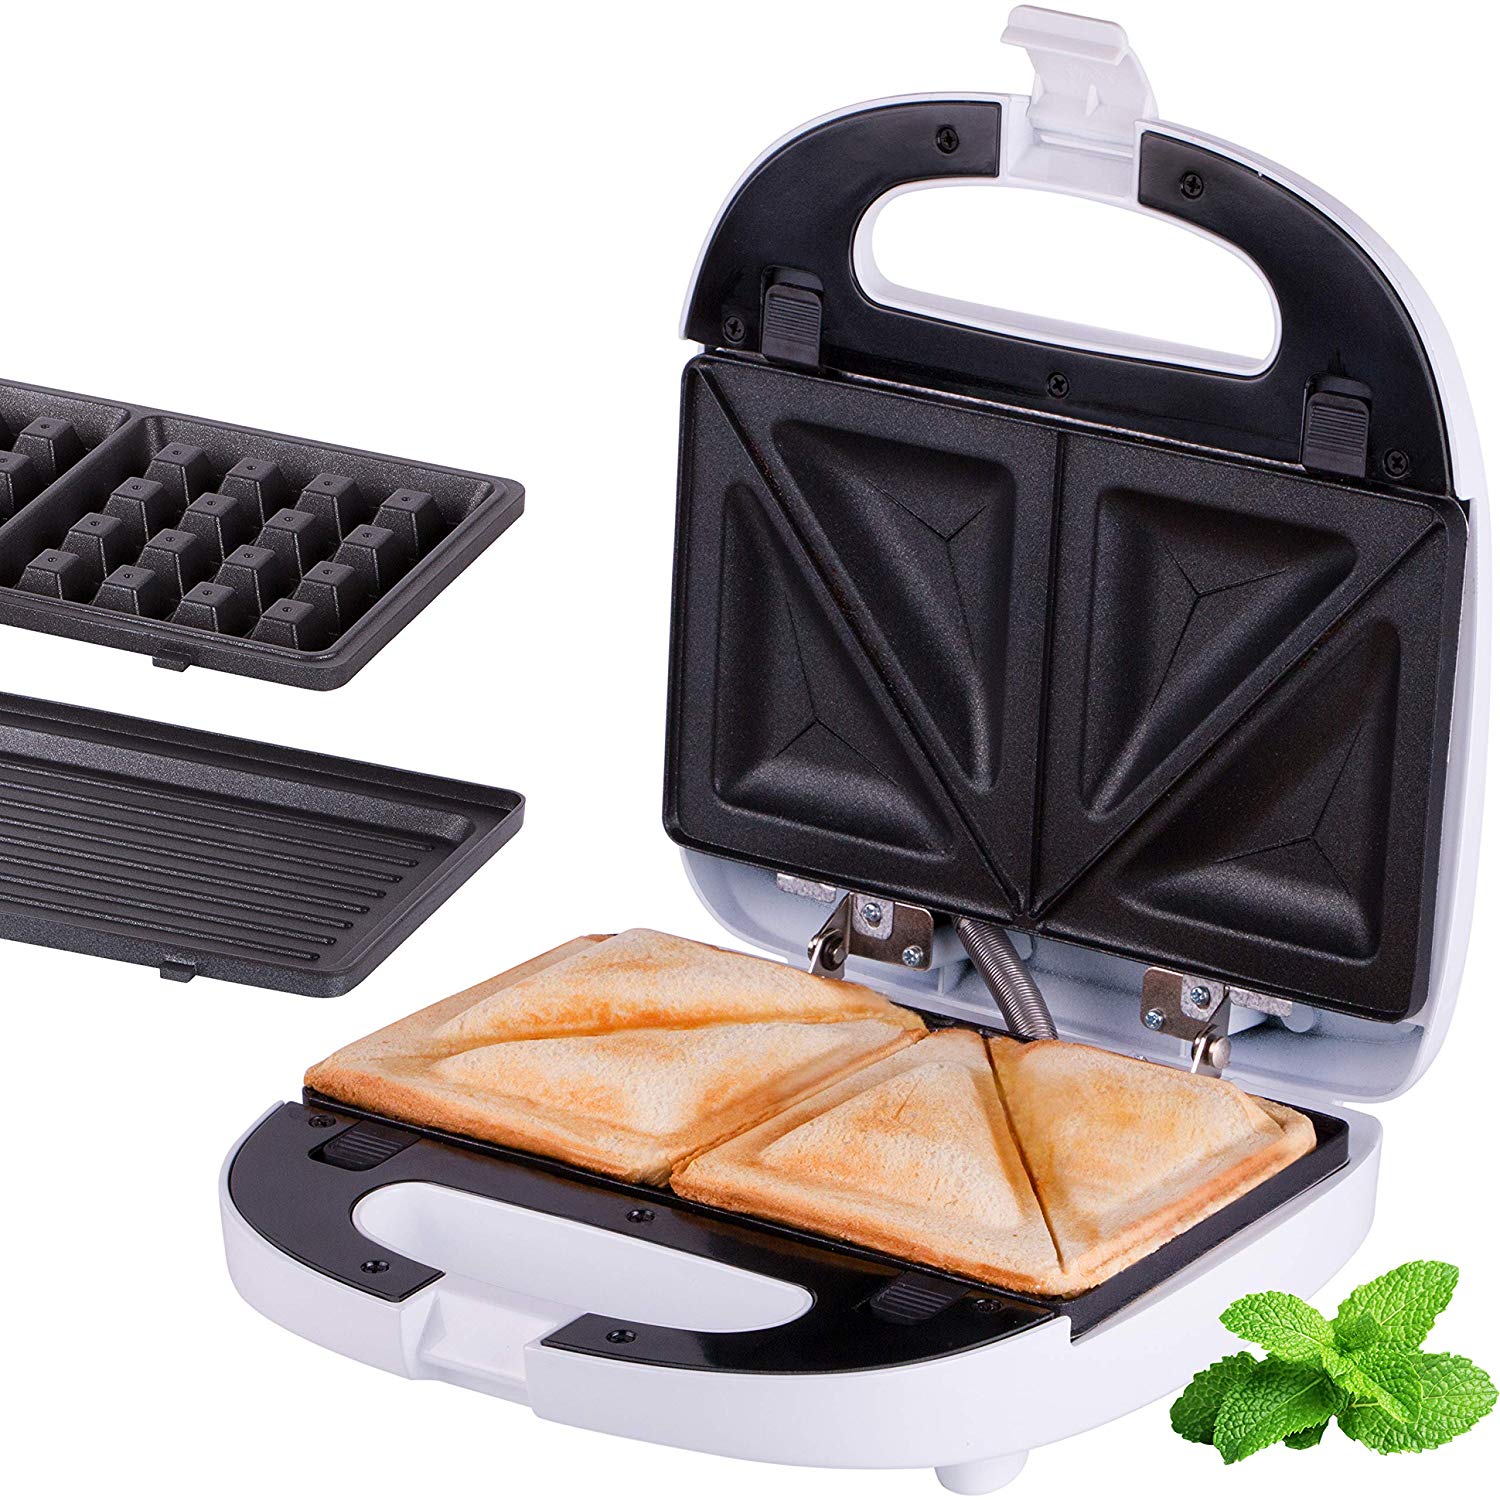 http://honestforwarder.com/uploads/product/qN4tJv3r0X-3-in-1-sandwich-maker-waffle-iron-table-top-grill-with-click-system-thermostat-oven-electric-sandwich-toaster-700-watt-contact-grill02.jpg